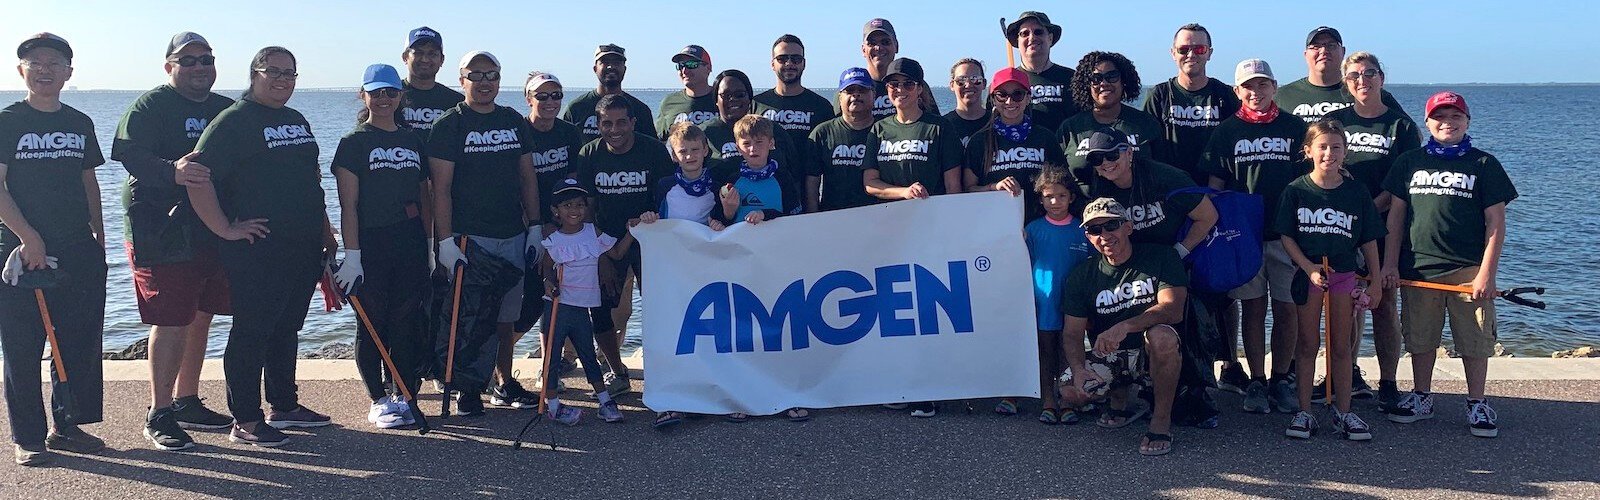 Amgen team members participating in the 2019 International Coastal Cleanup Day at the Courtney Campbell Causeway.